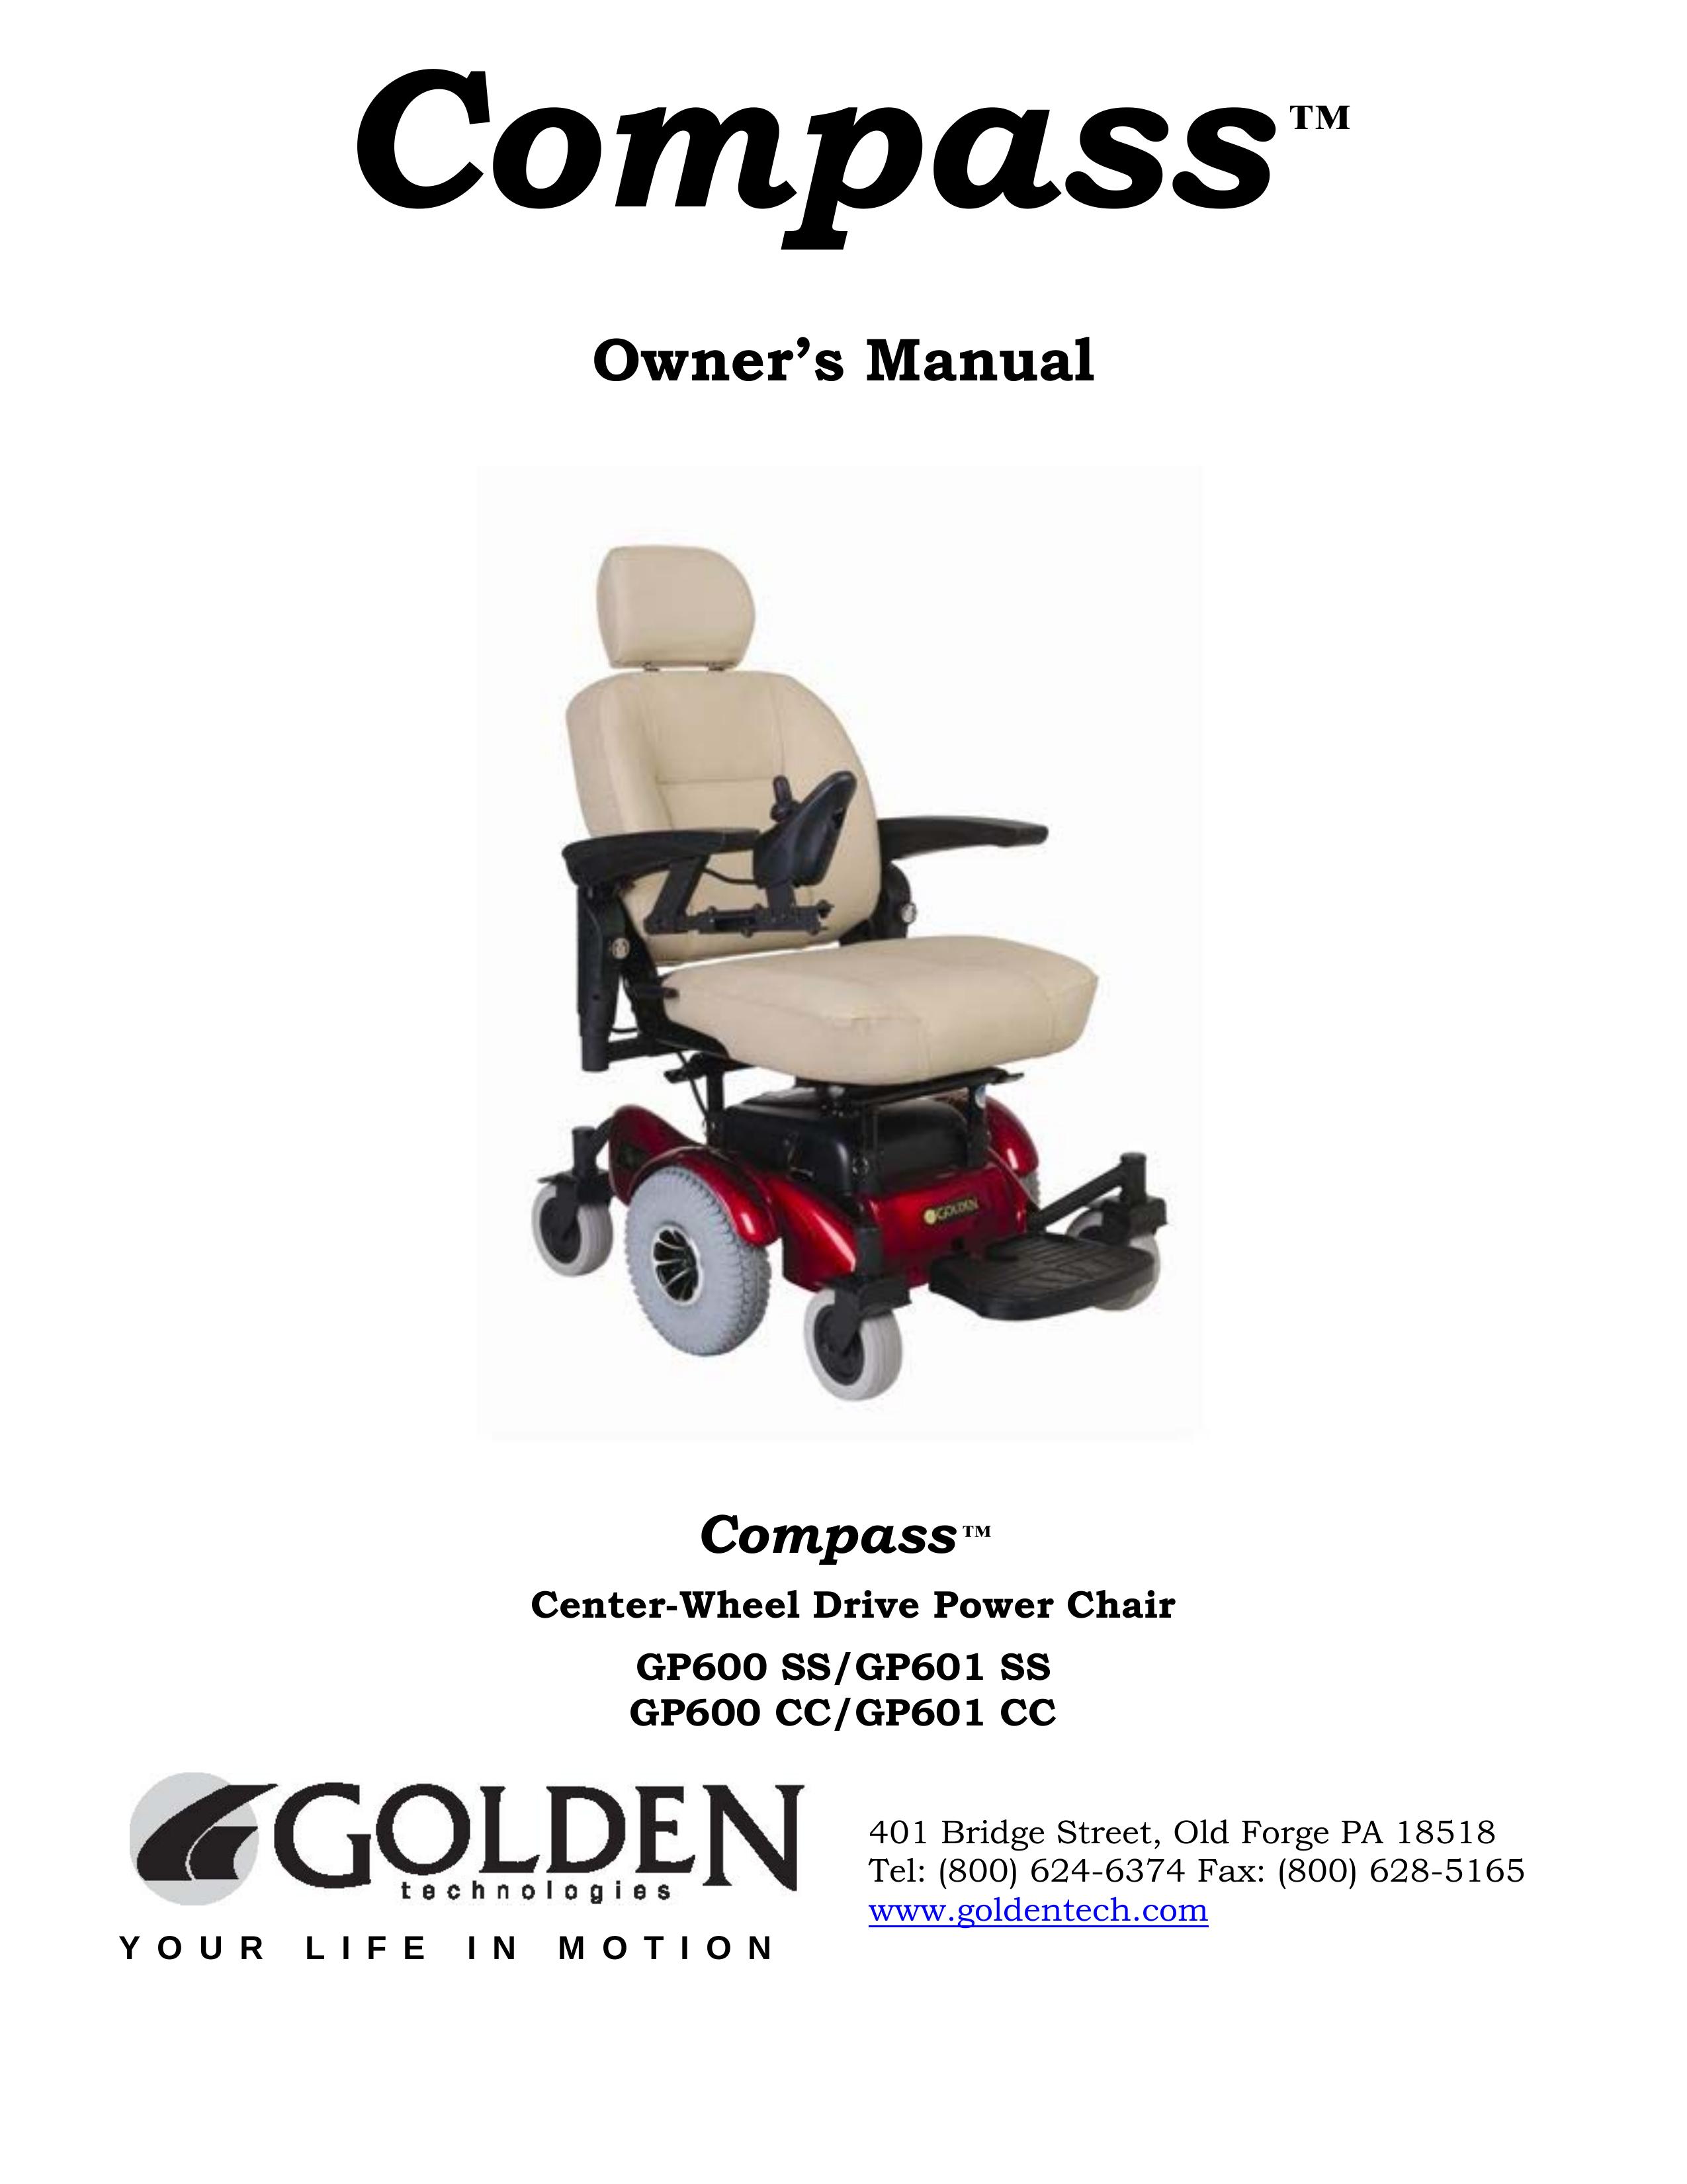 Golden Technologies GP600 CC Mobility Aid User Manual